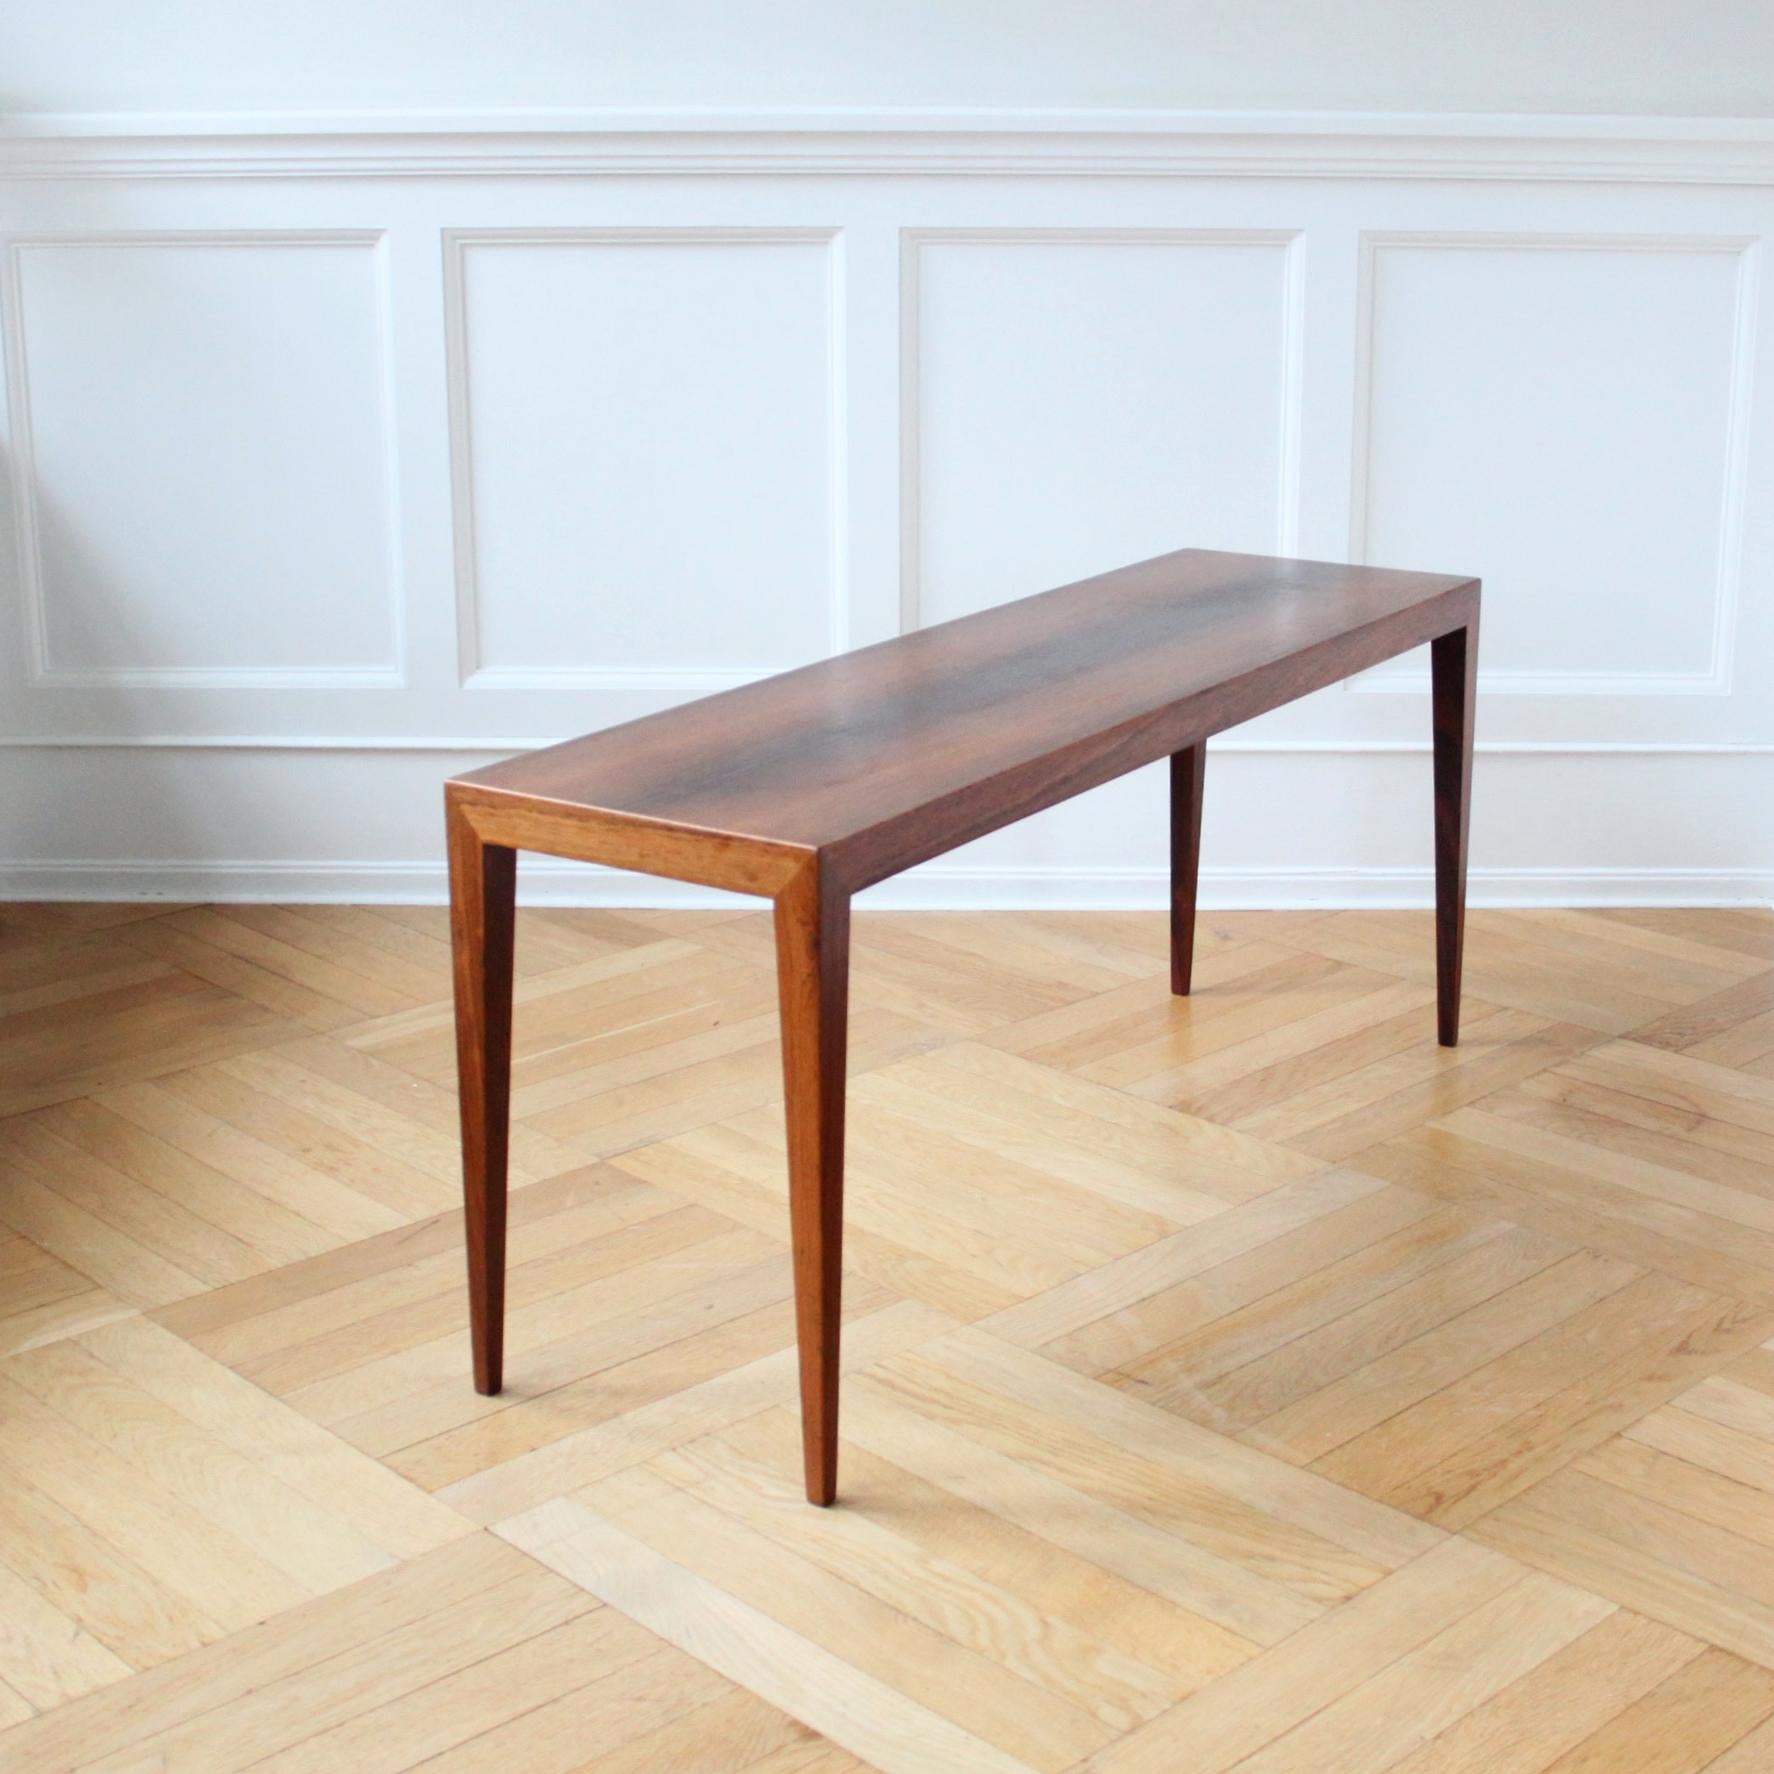 SEVERIN HANSEN & HASLEV MØBELSNEDKERI
SCANDINAVIAN MODERN

A beautiful coffee table or end table for beds, Severin Hansen, Haslev Møbelsnedkeri, Denmark 1960s.  Elegant design and perfect for end of bed table. With manufacturer's label.

Very good